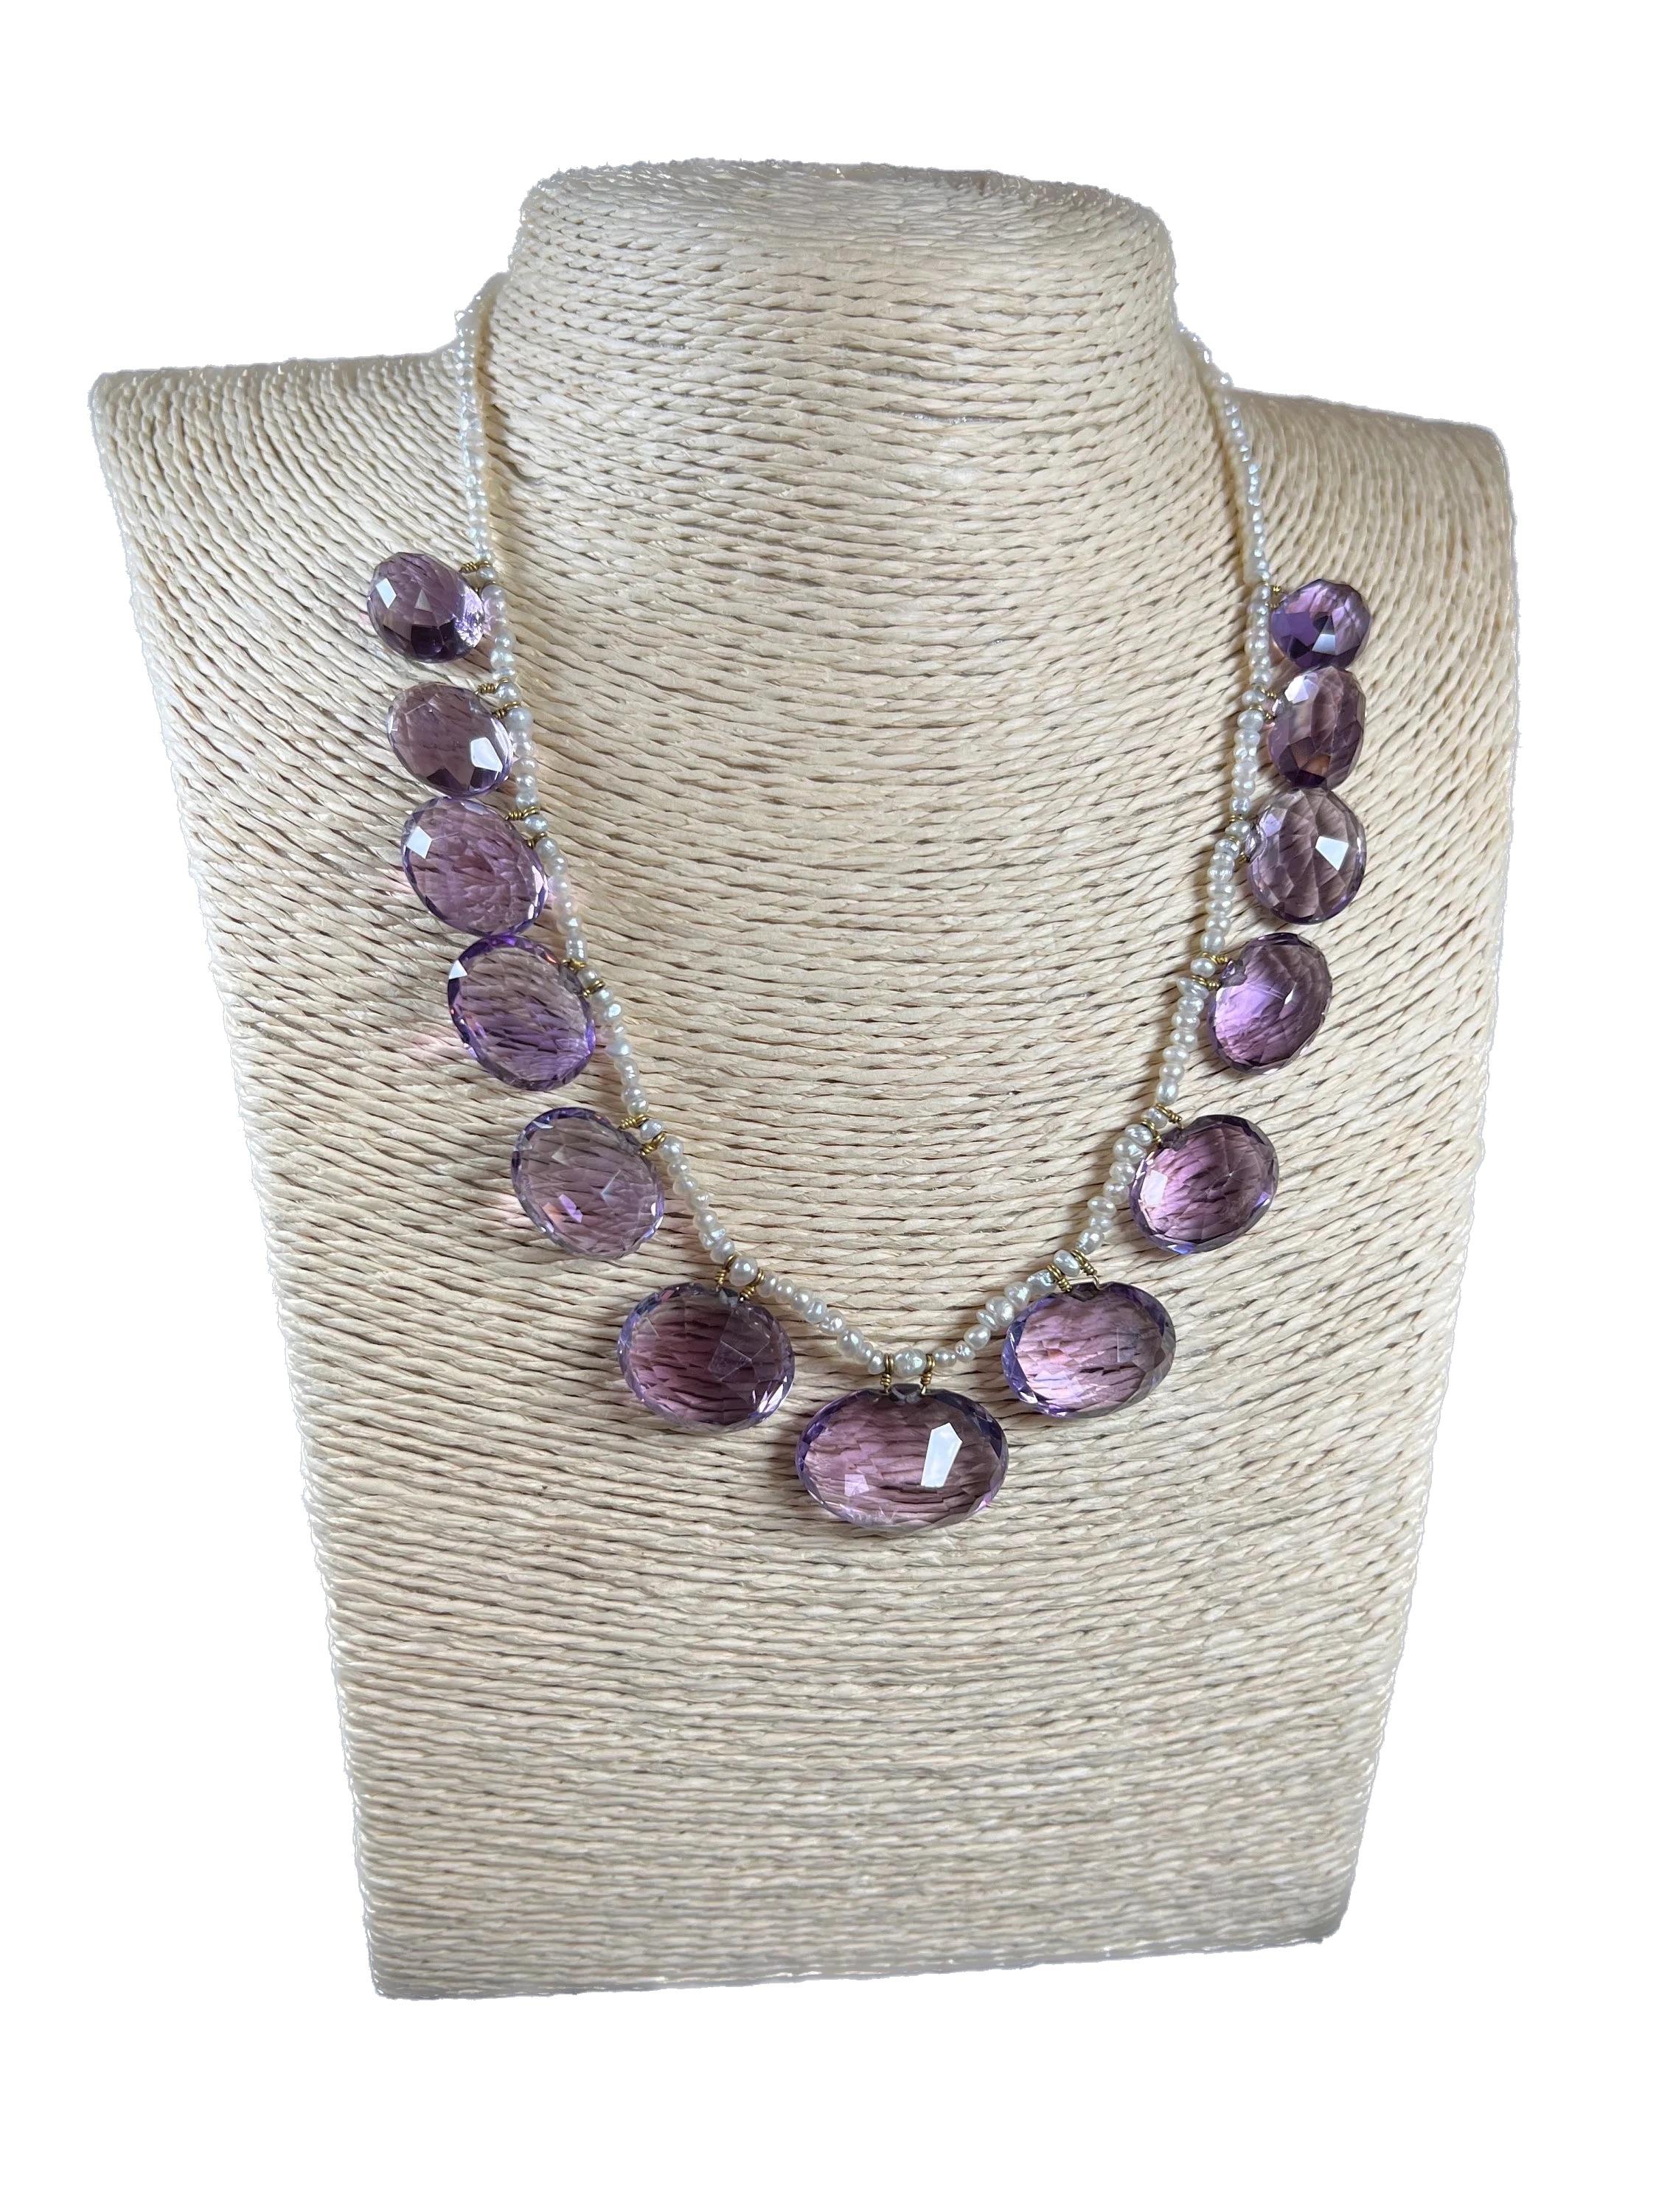 Antique Amethyst Necklace 

18ct Gold Clasp

Circa 1900

The most fabulous, Edwardian necklace. Beautifully threaded with natural seed pearls, suspended from which are thirteen, gorgeous, graduated amethysts. 
The amethysts are faceted & oval in